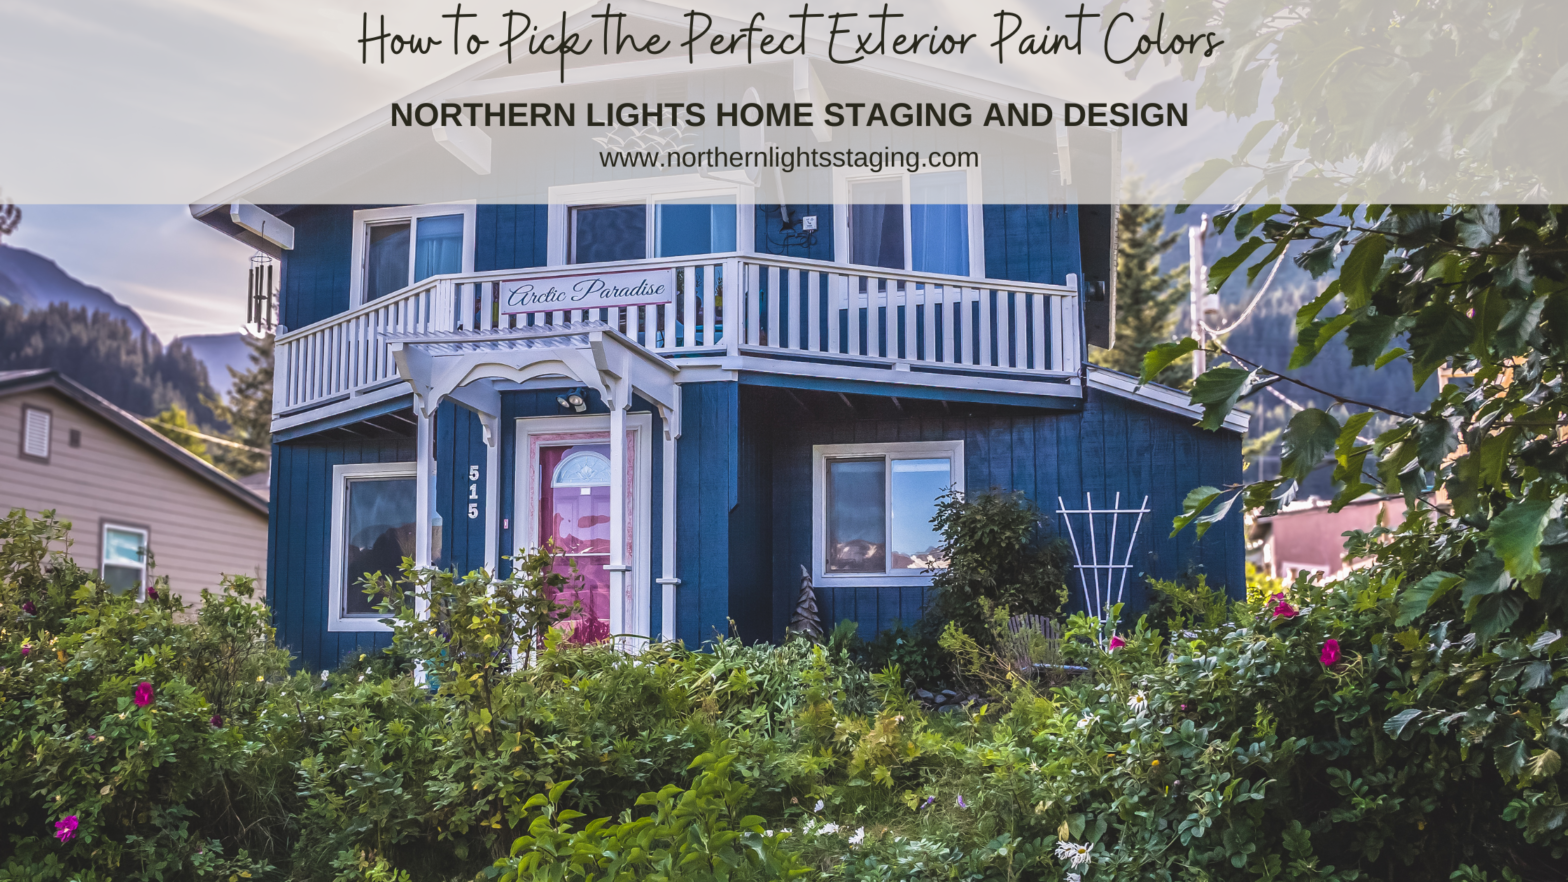 How to pick the perfect exterior paint colors- Part 1